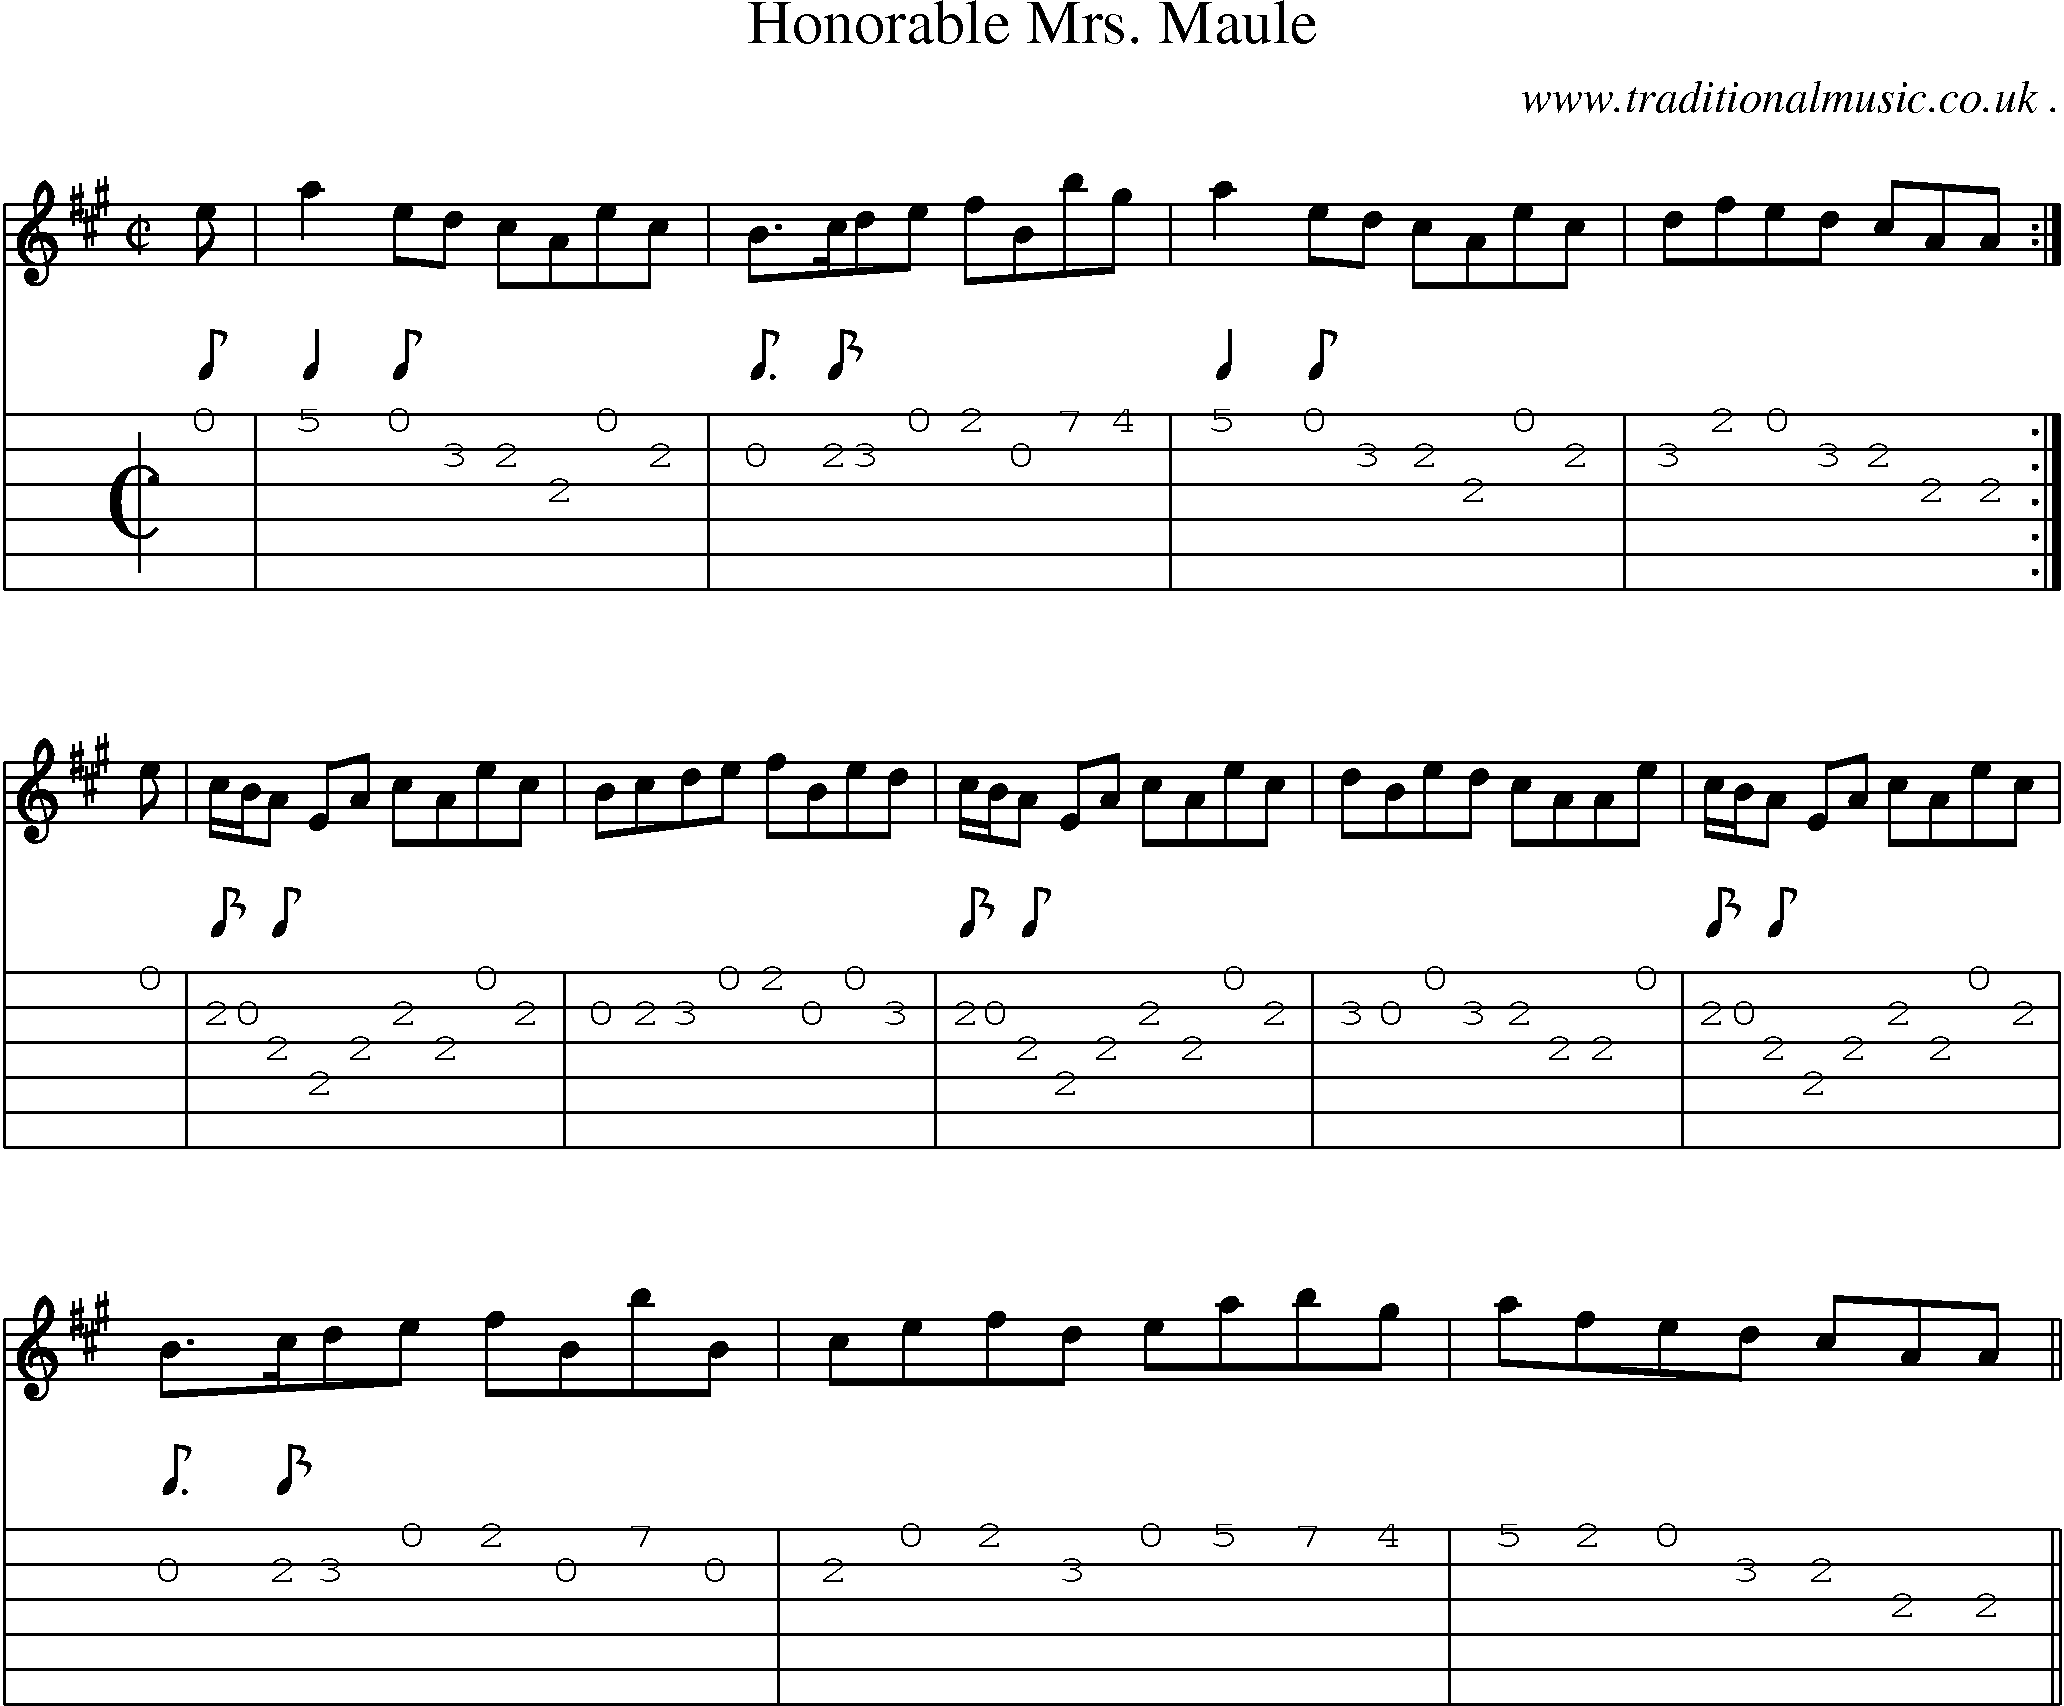 Sheet-music  score, Chords and Guitar Tabs for Honorable Mrs Maule